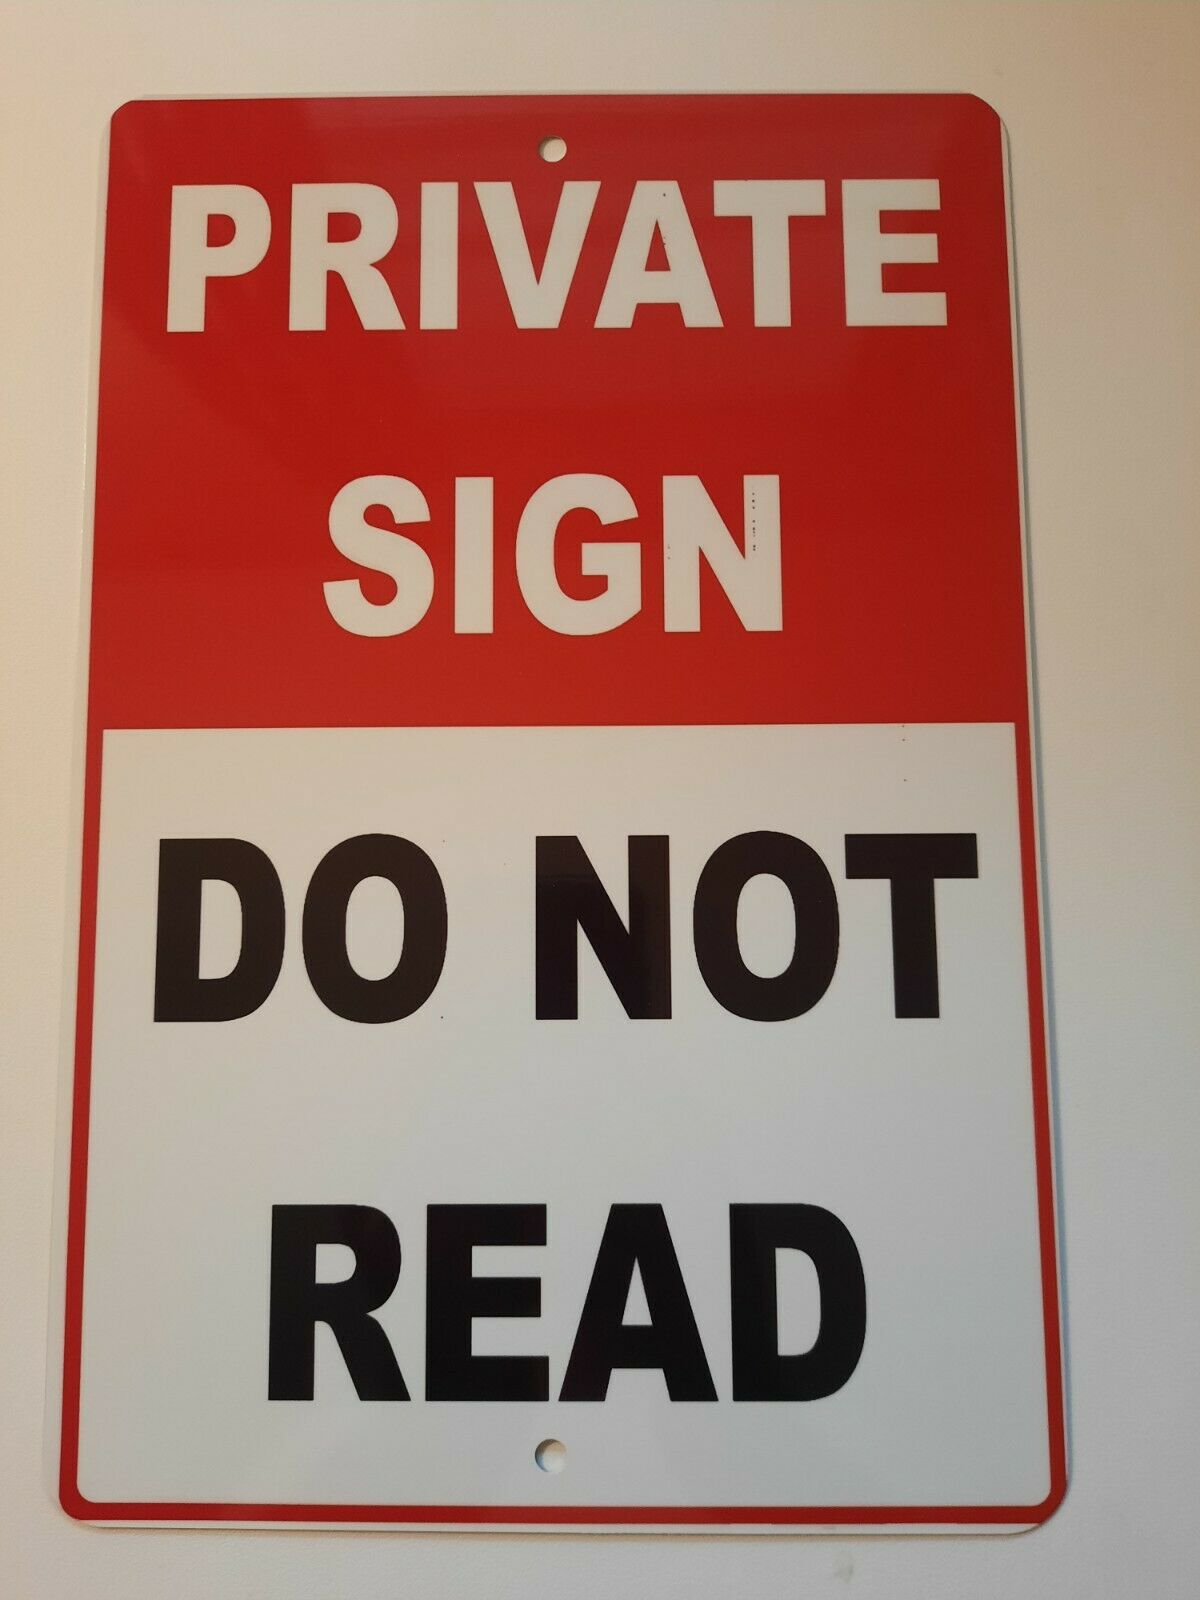 Private Sign Do Not Read 8x12 Metal Wall Sign Garage Man Cave Funny Misc Poster